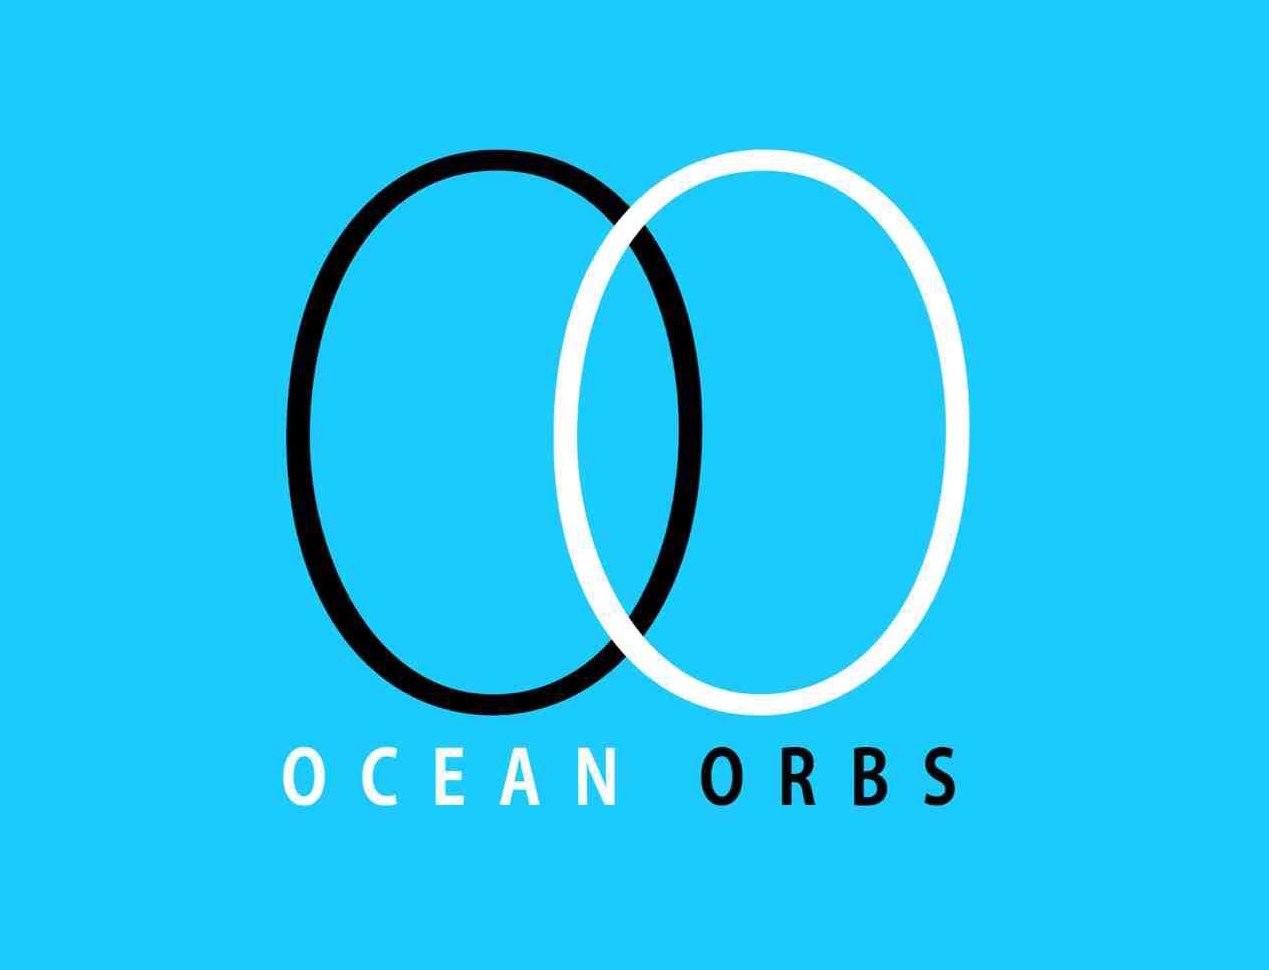 Ocean Orbs strives to ignite a global social movement to prevent cigarette butts from entering our streets, landfills and marine environment.